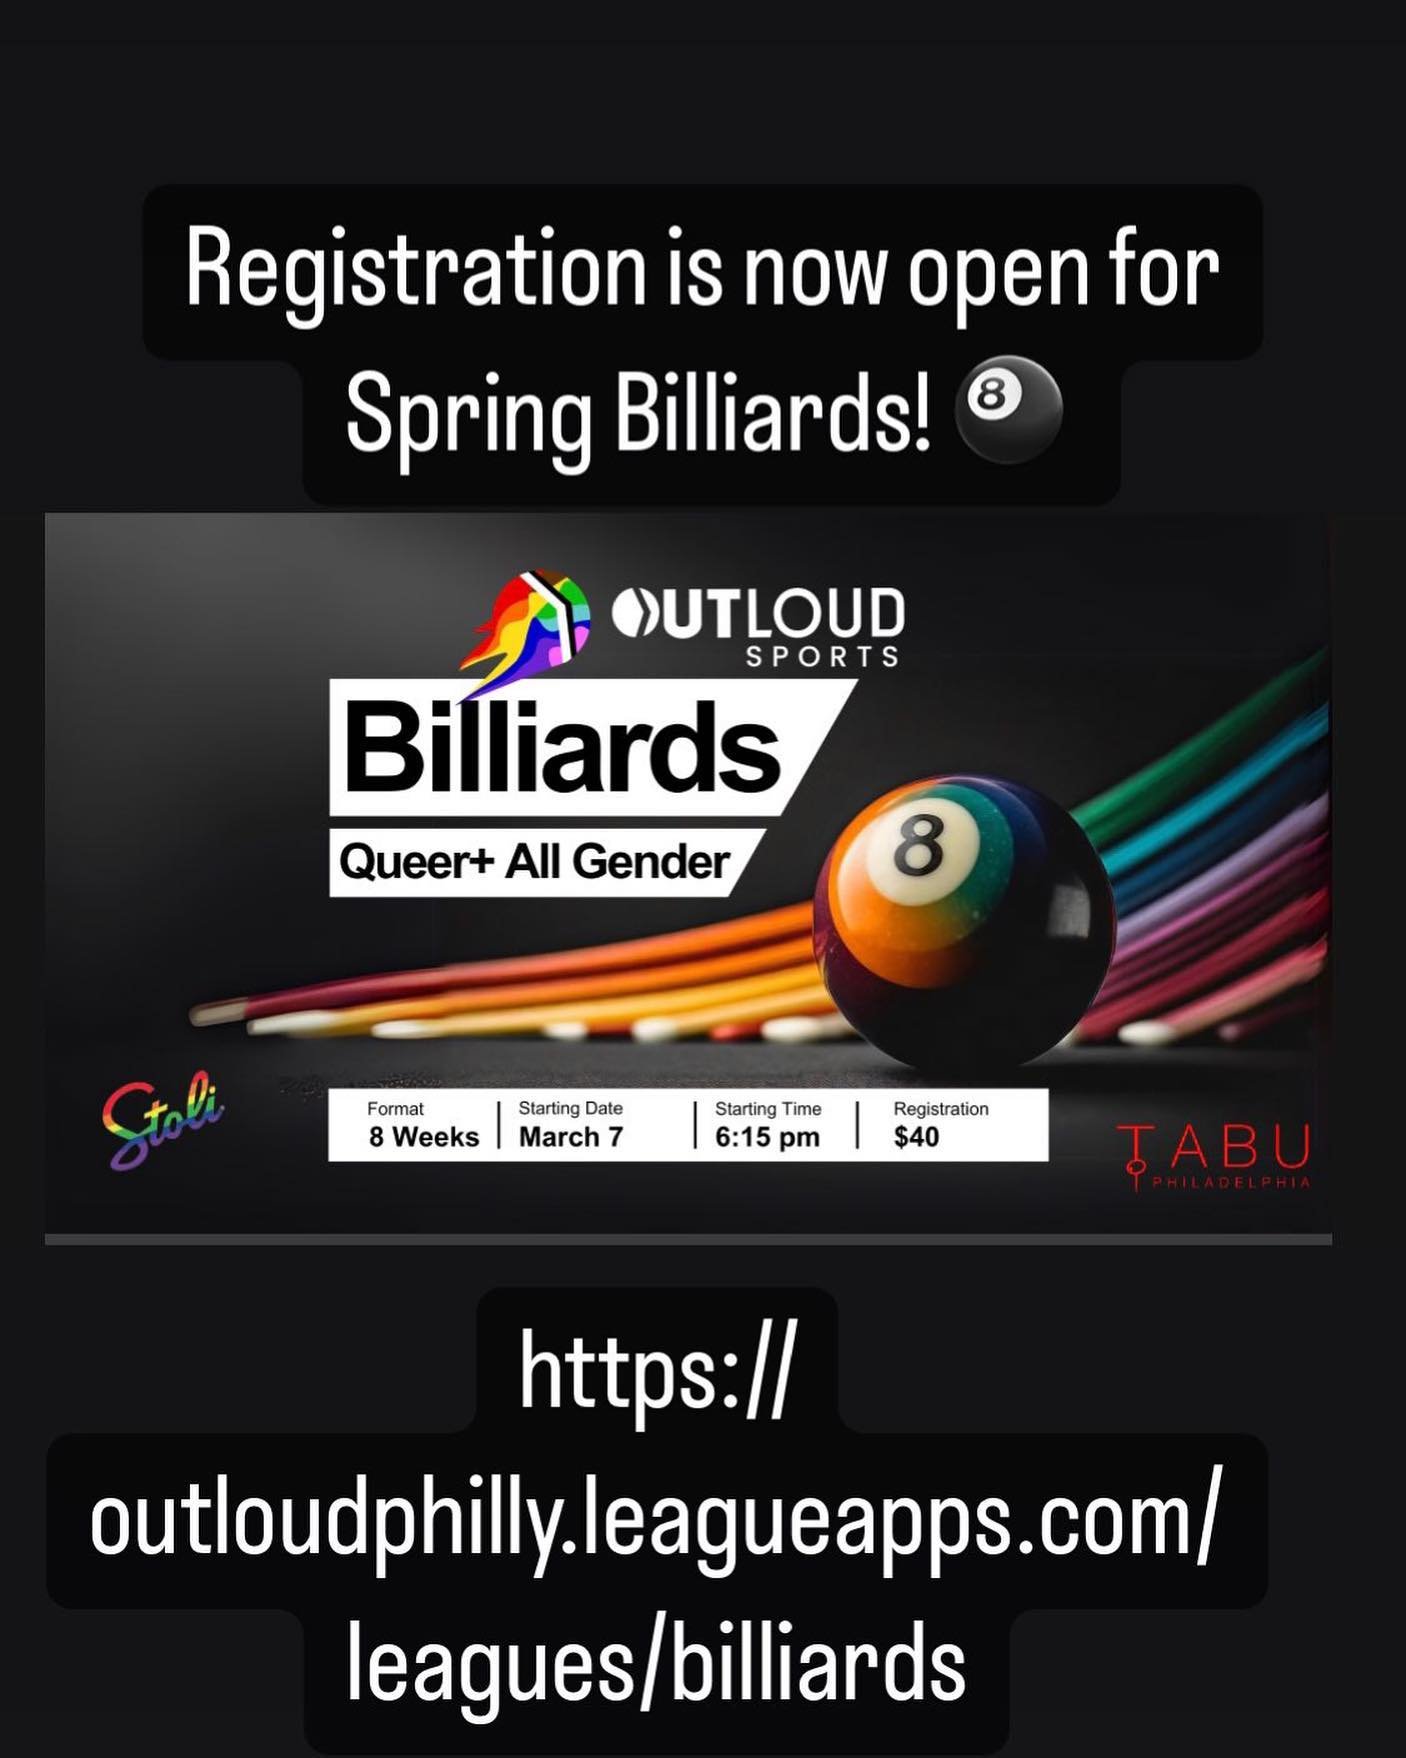 Spring Billiards has sprung upon us! Sign up today, Cash Prizes for Top 2 teams at end of season tournament! Registration link in bio.